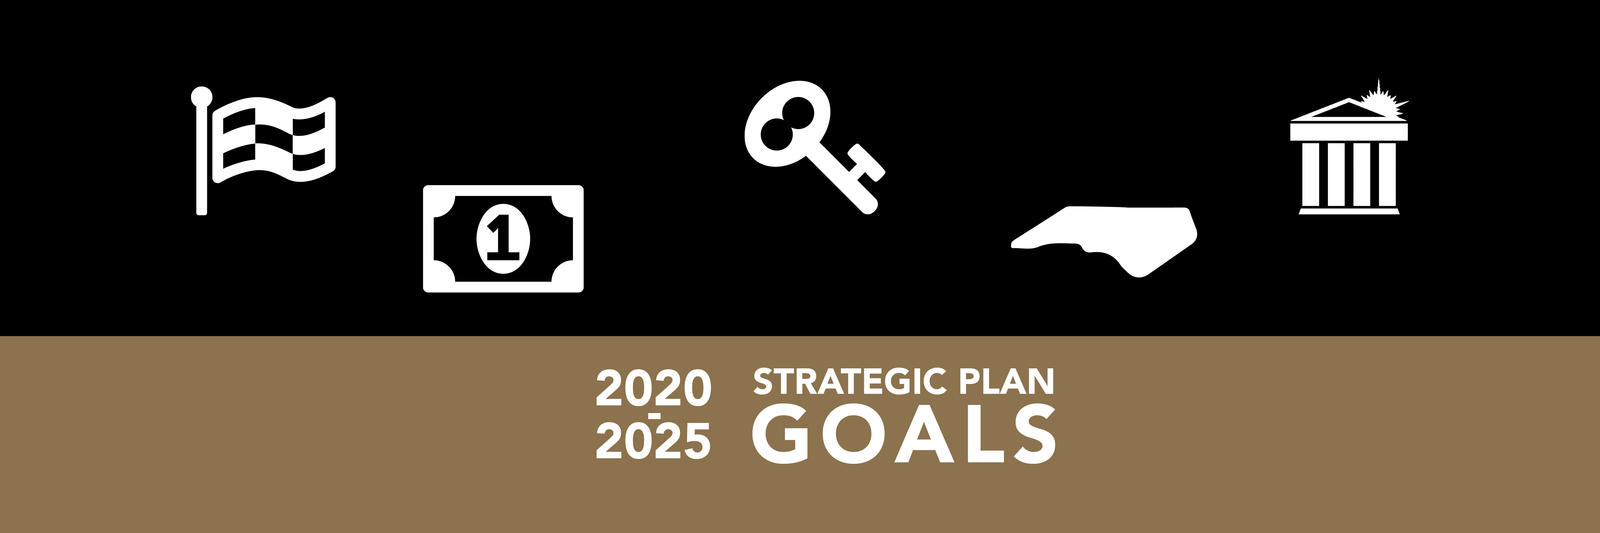 UNCP Strategic Plan Goals and Objectives